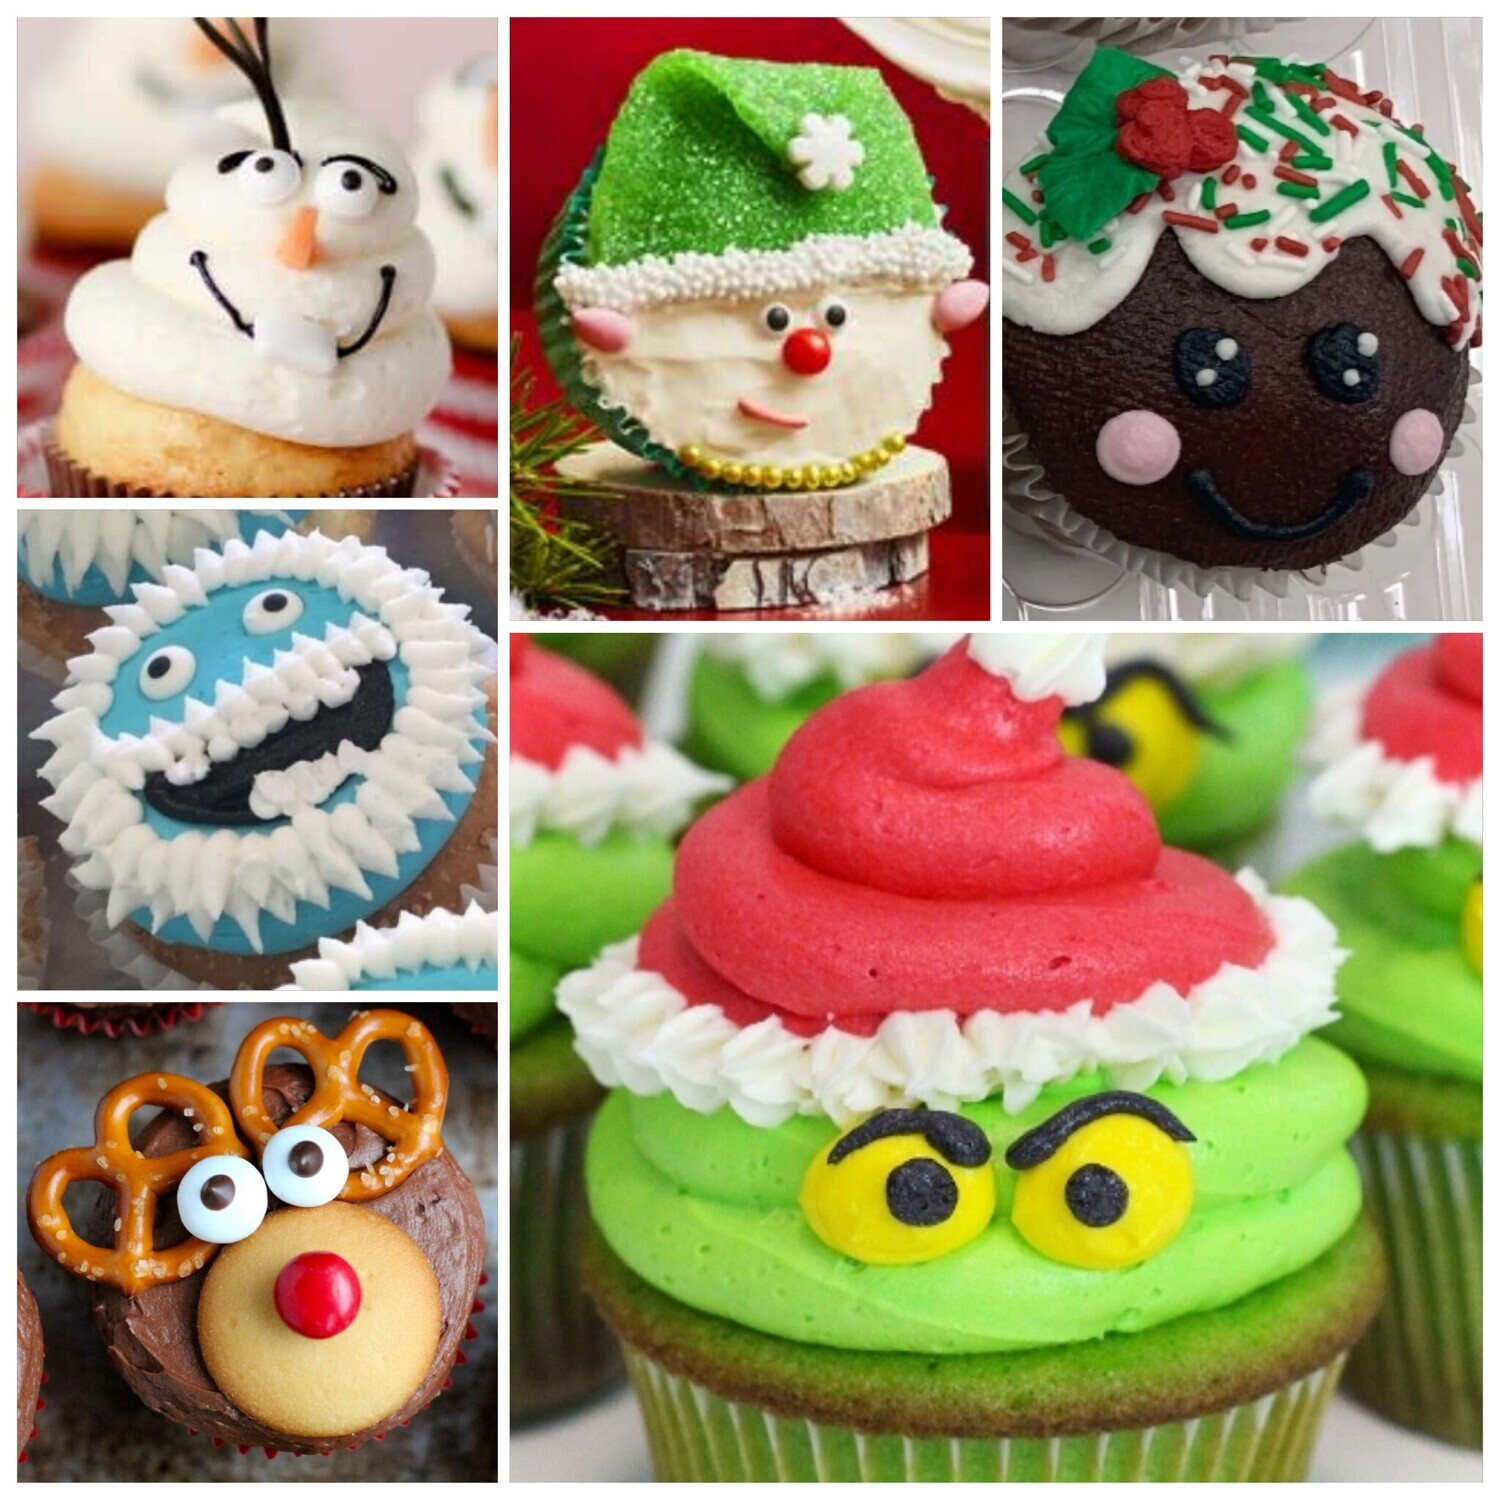 All Ages Christmas Character Cupcake Decorating Class Friday December 23rd from 6pm to 830pm